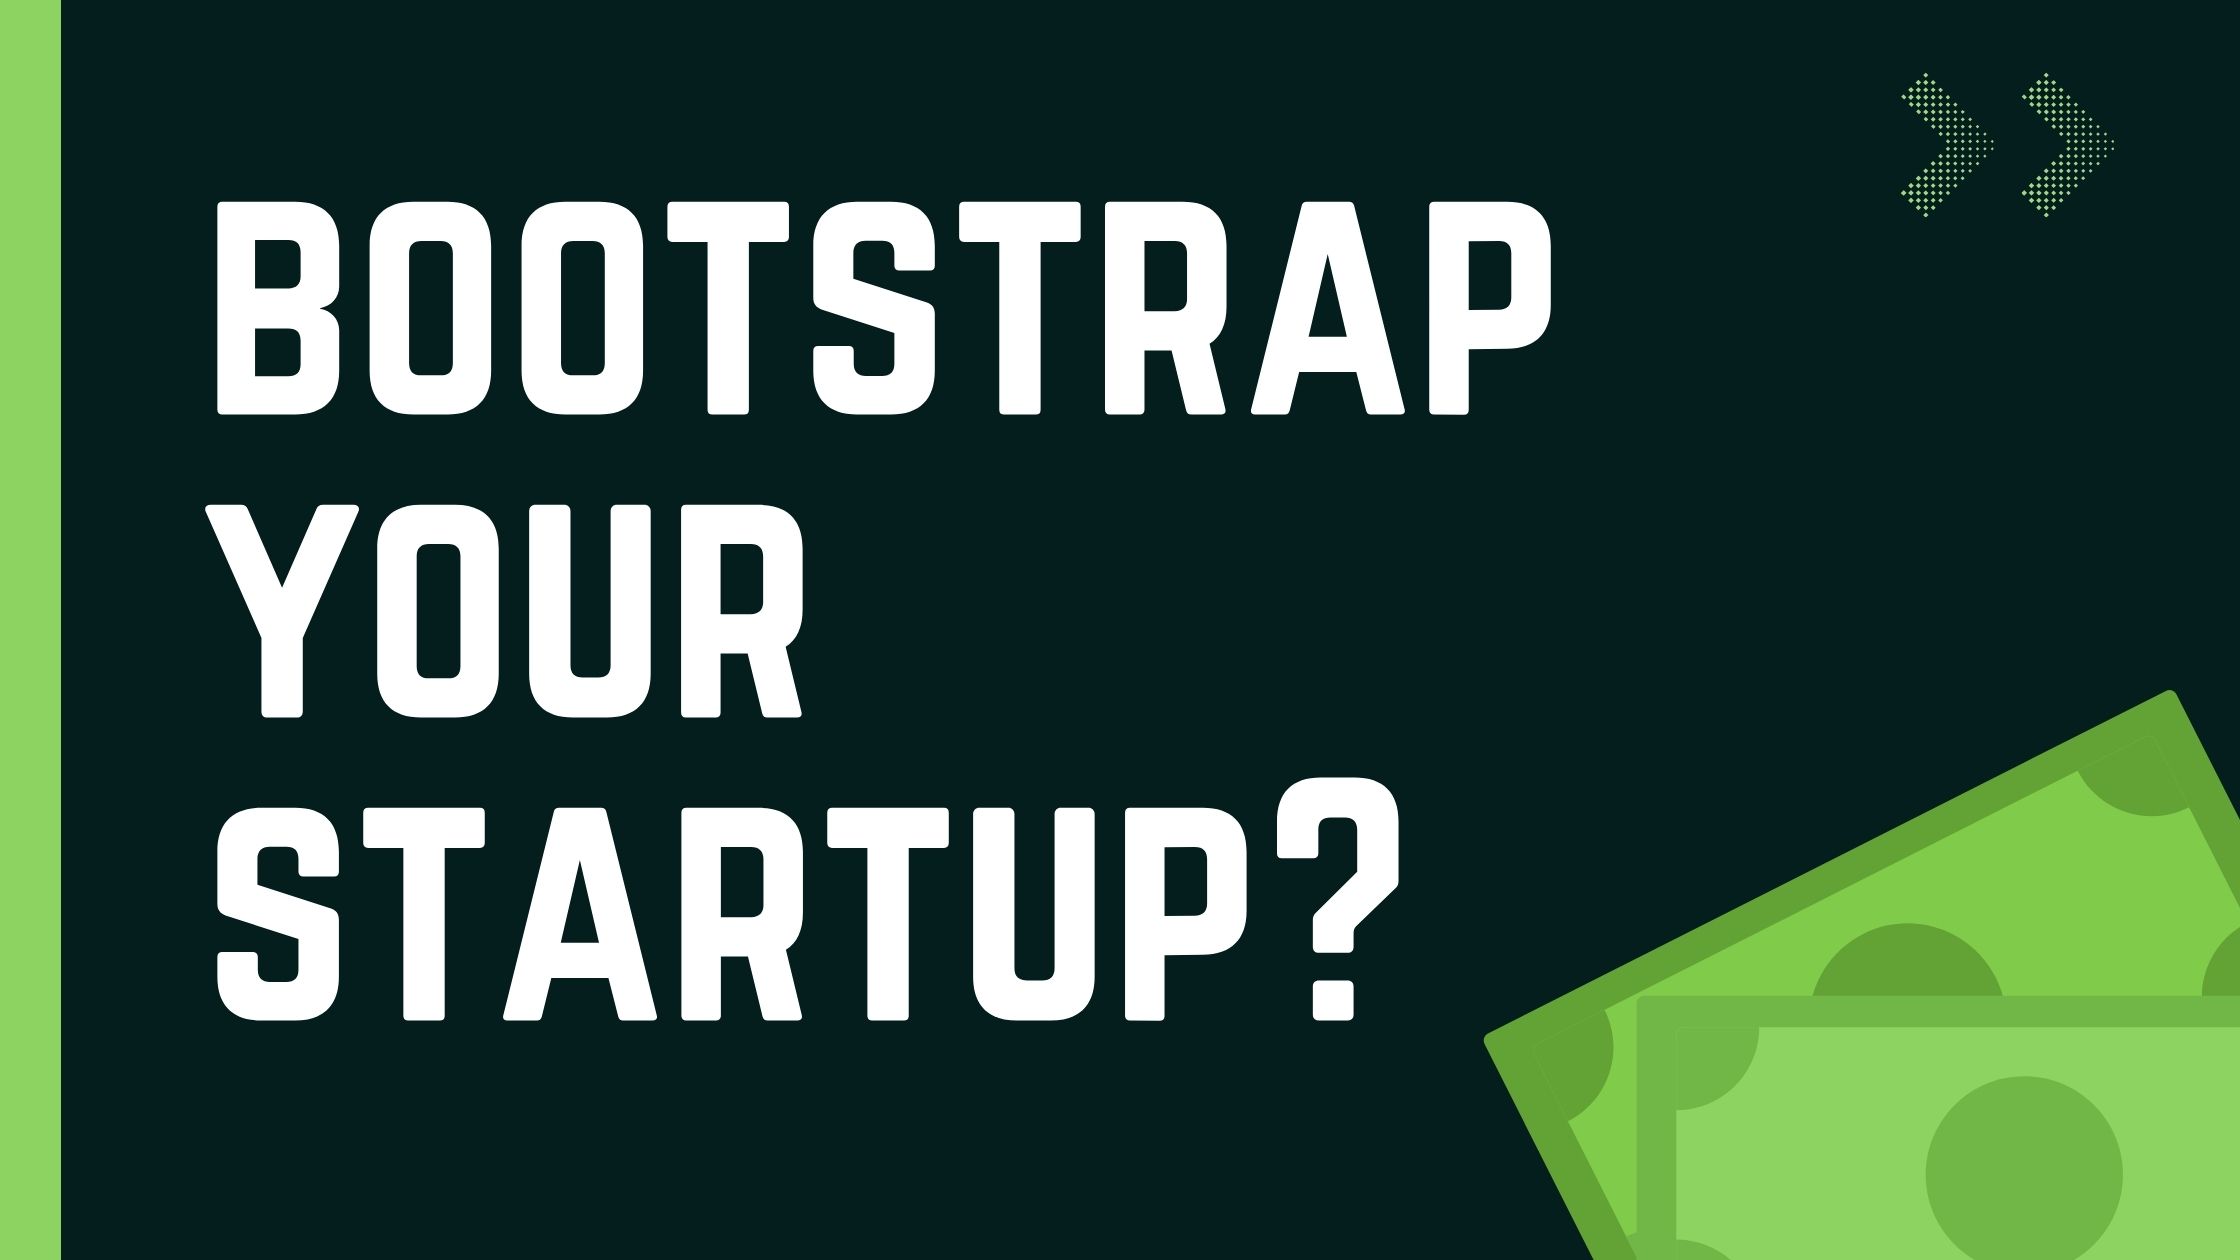 Should You Bootstrap Your Startup